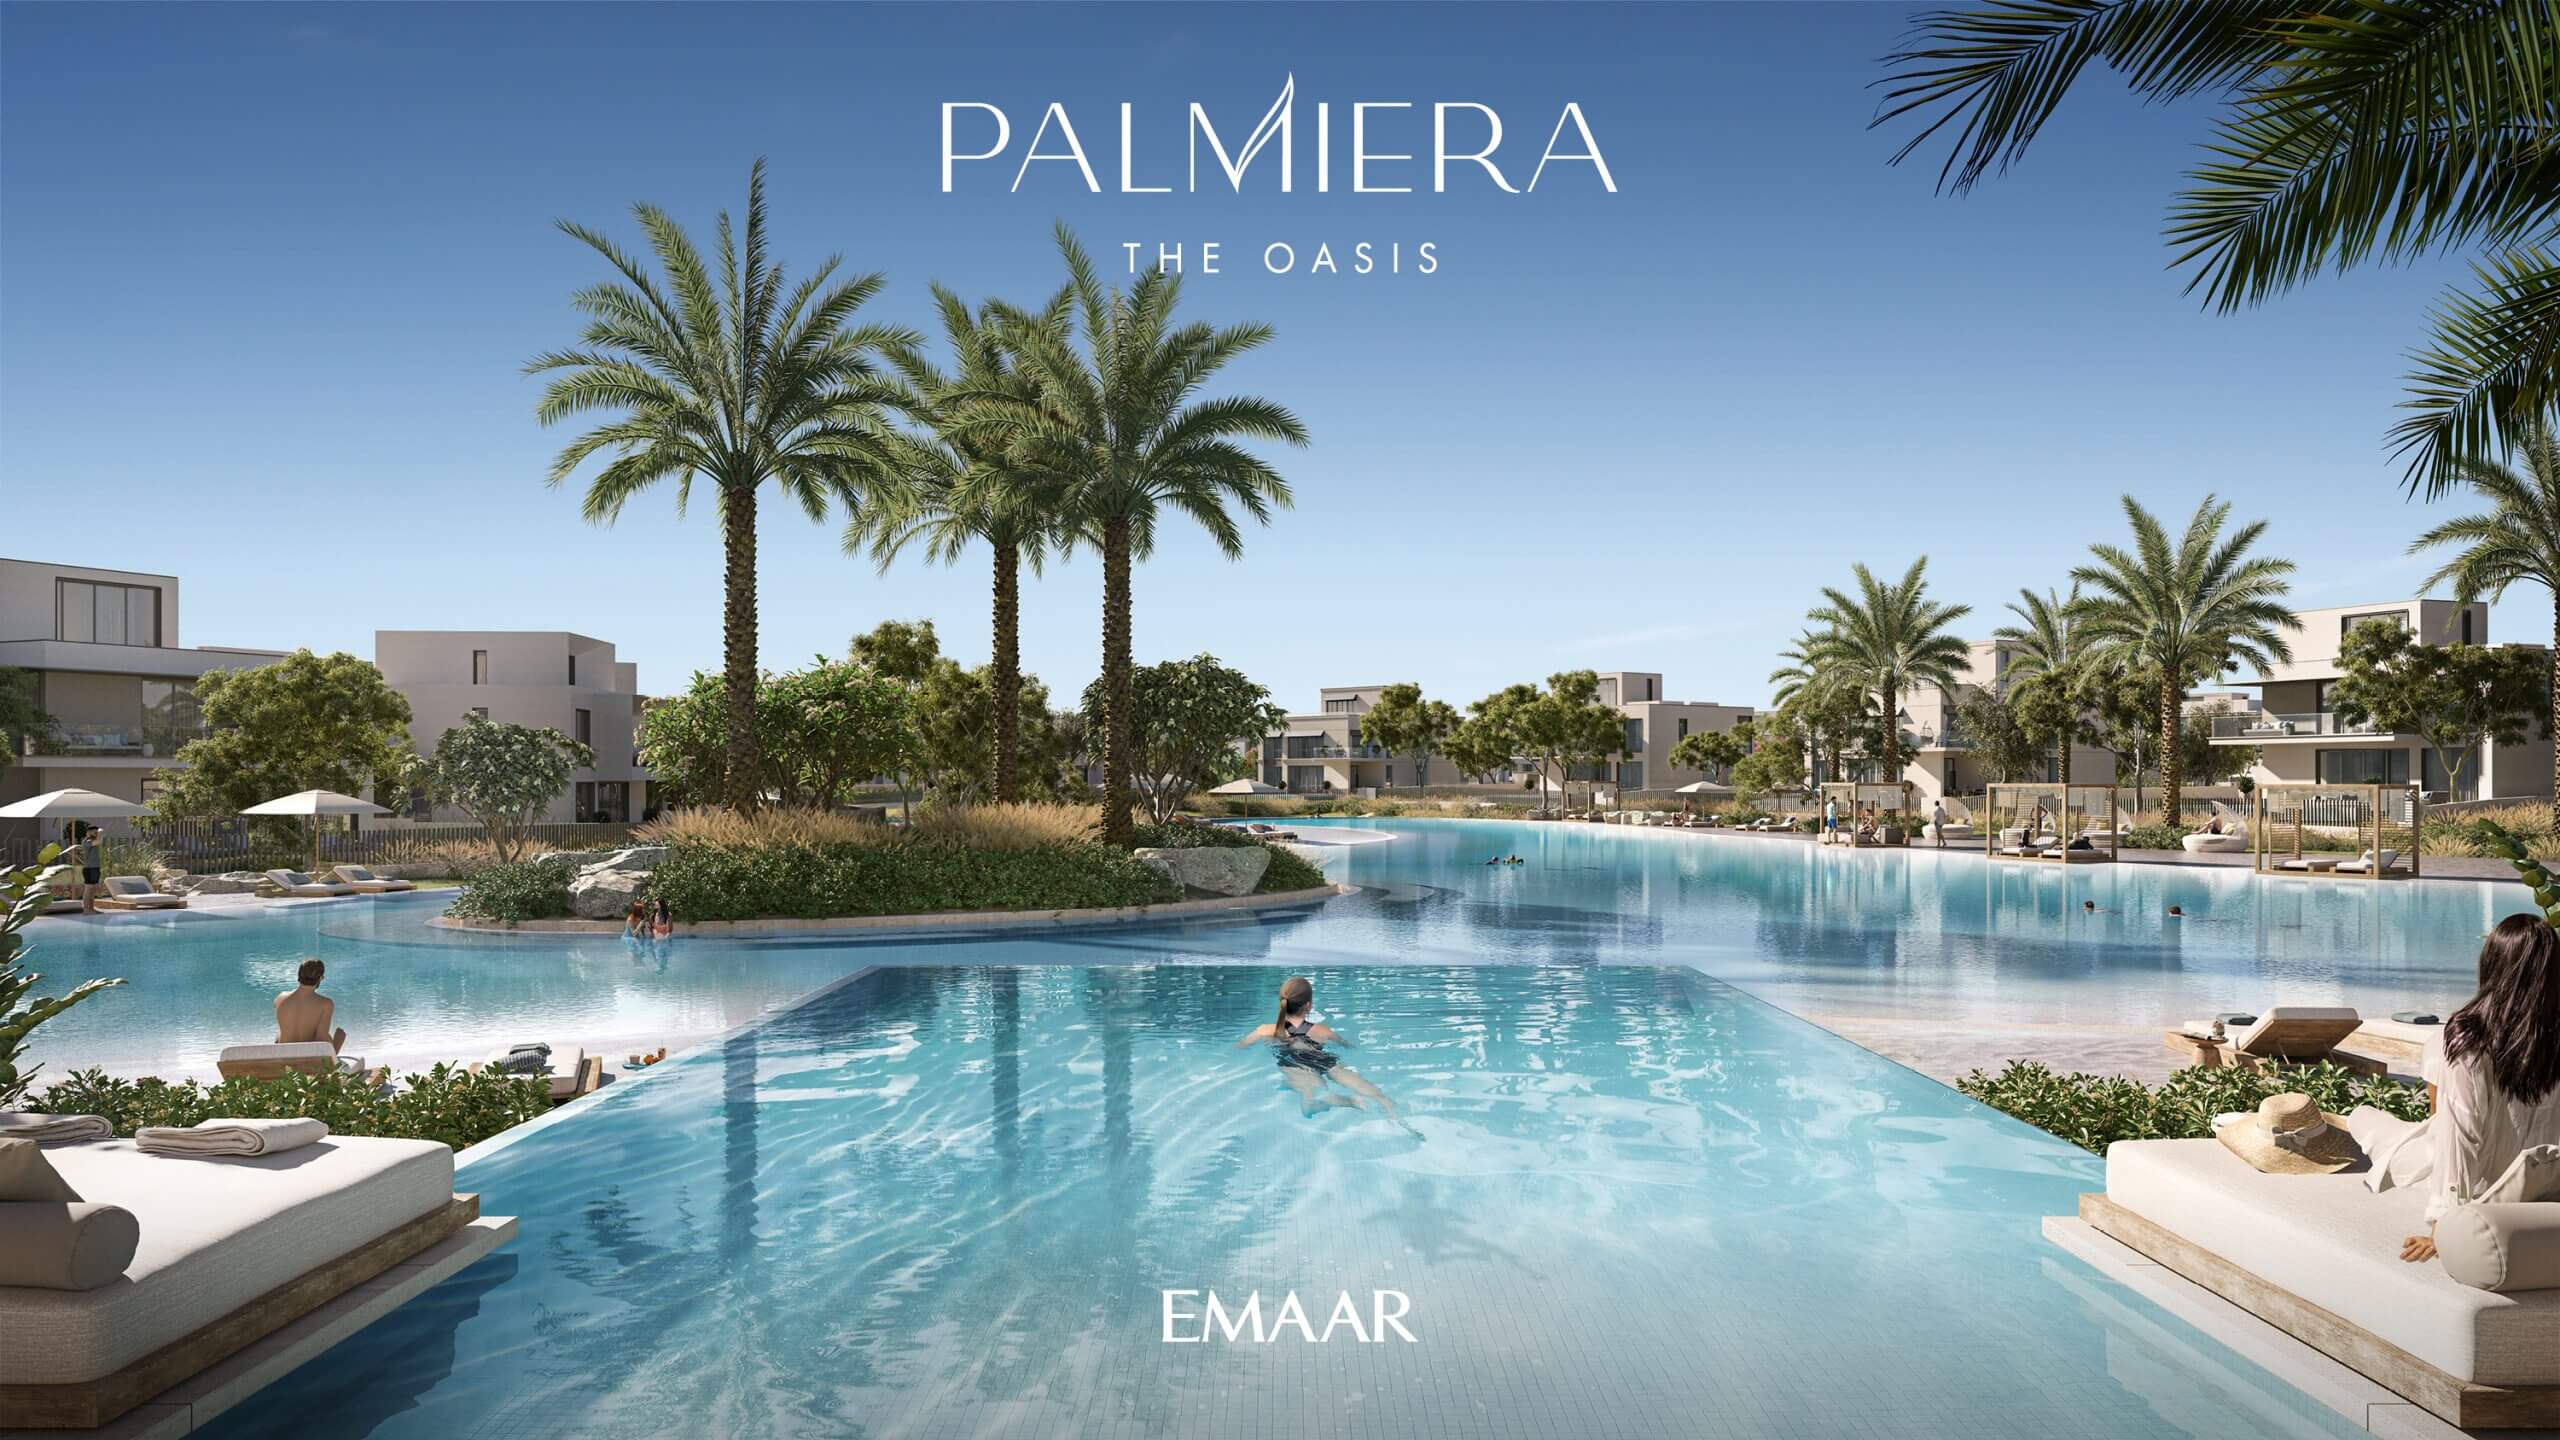 Exquisite luxury living in Dubai's prime location - PALIEMRA_RENDERS by PJ International, Dubai's top real estate agency. Discover unparalleled elegance and style in this premier property.